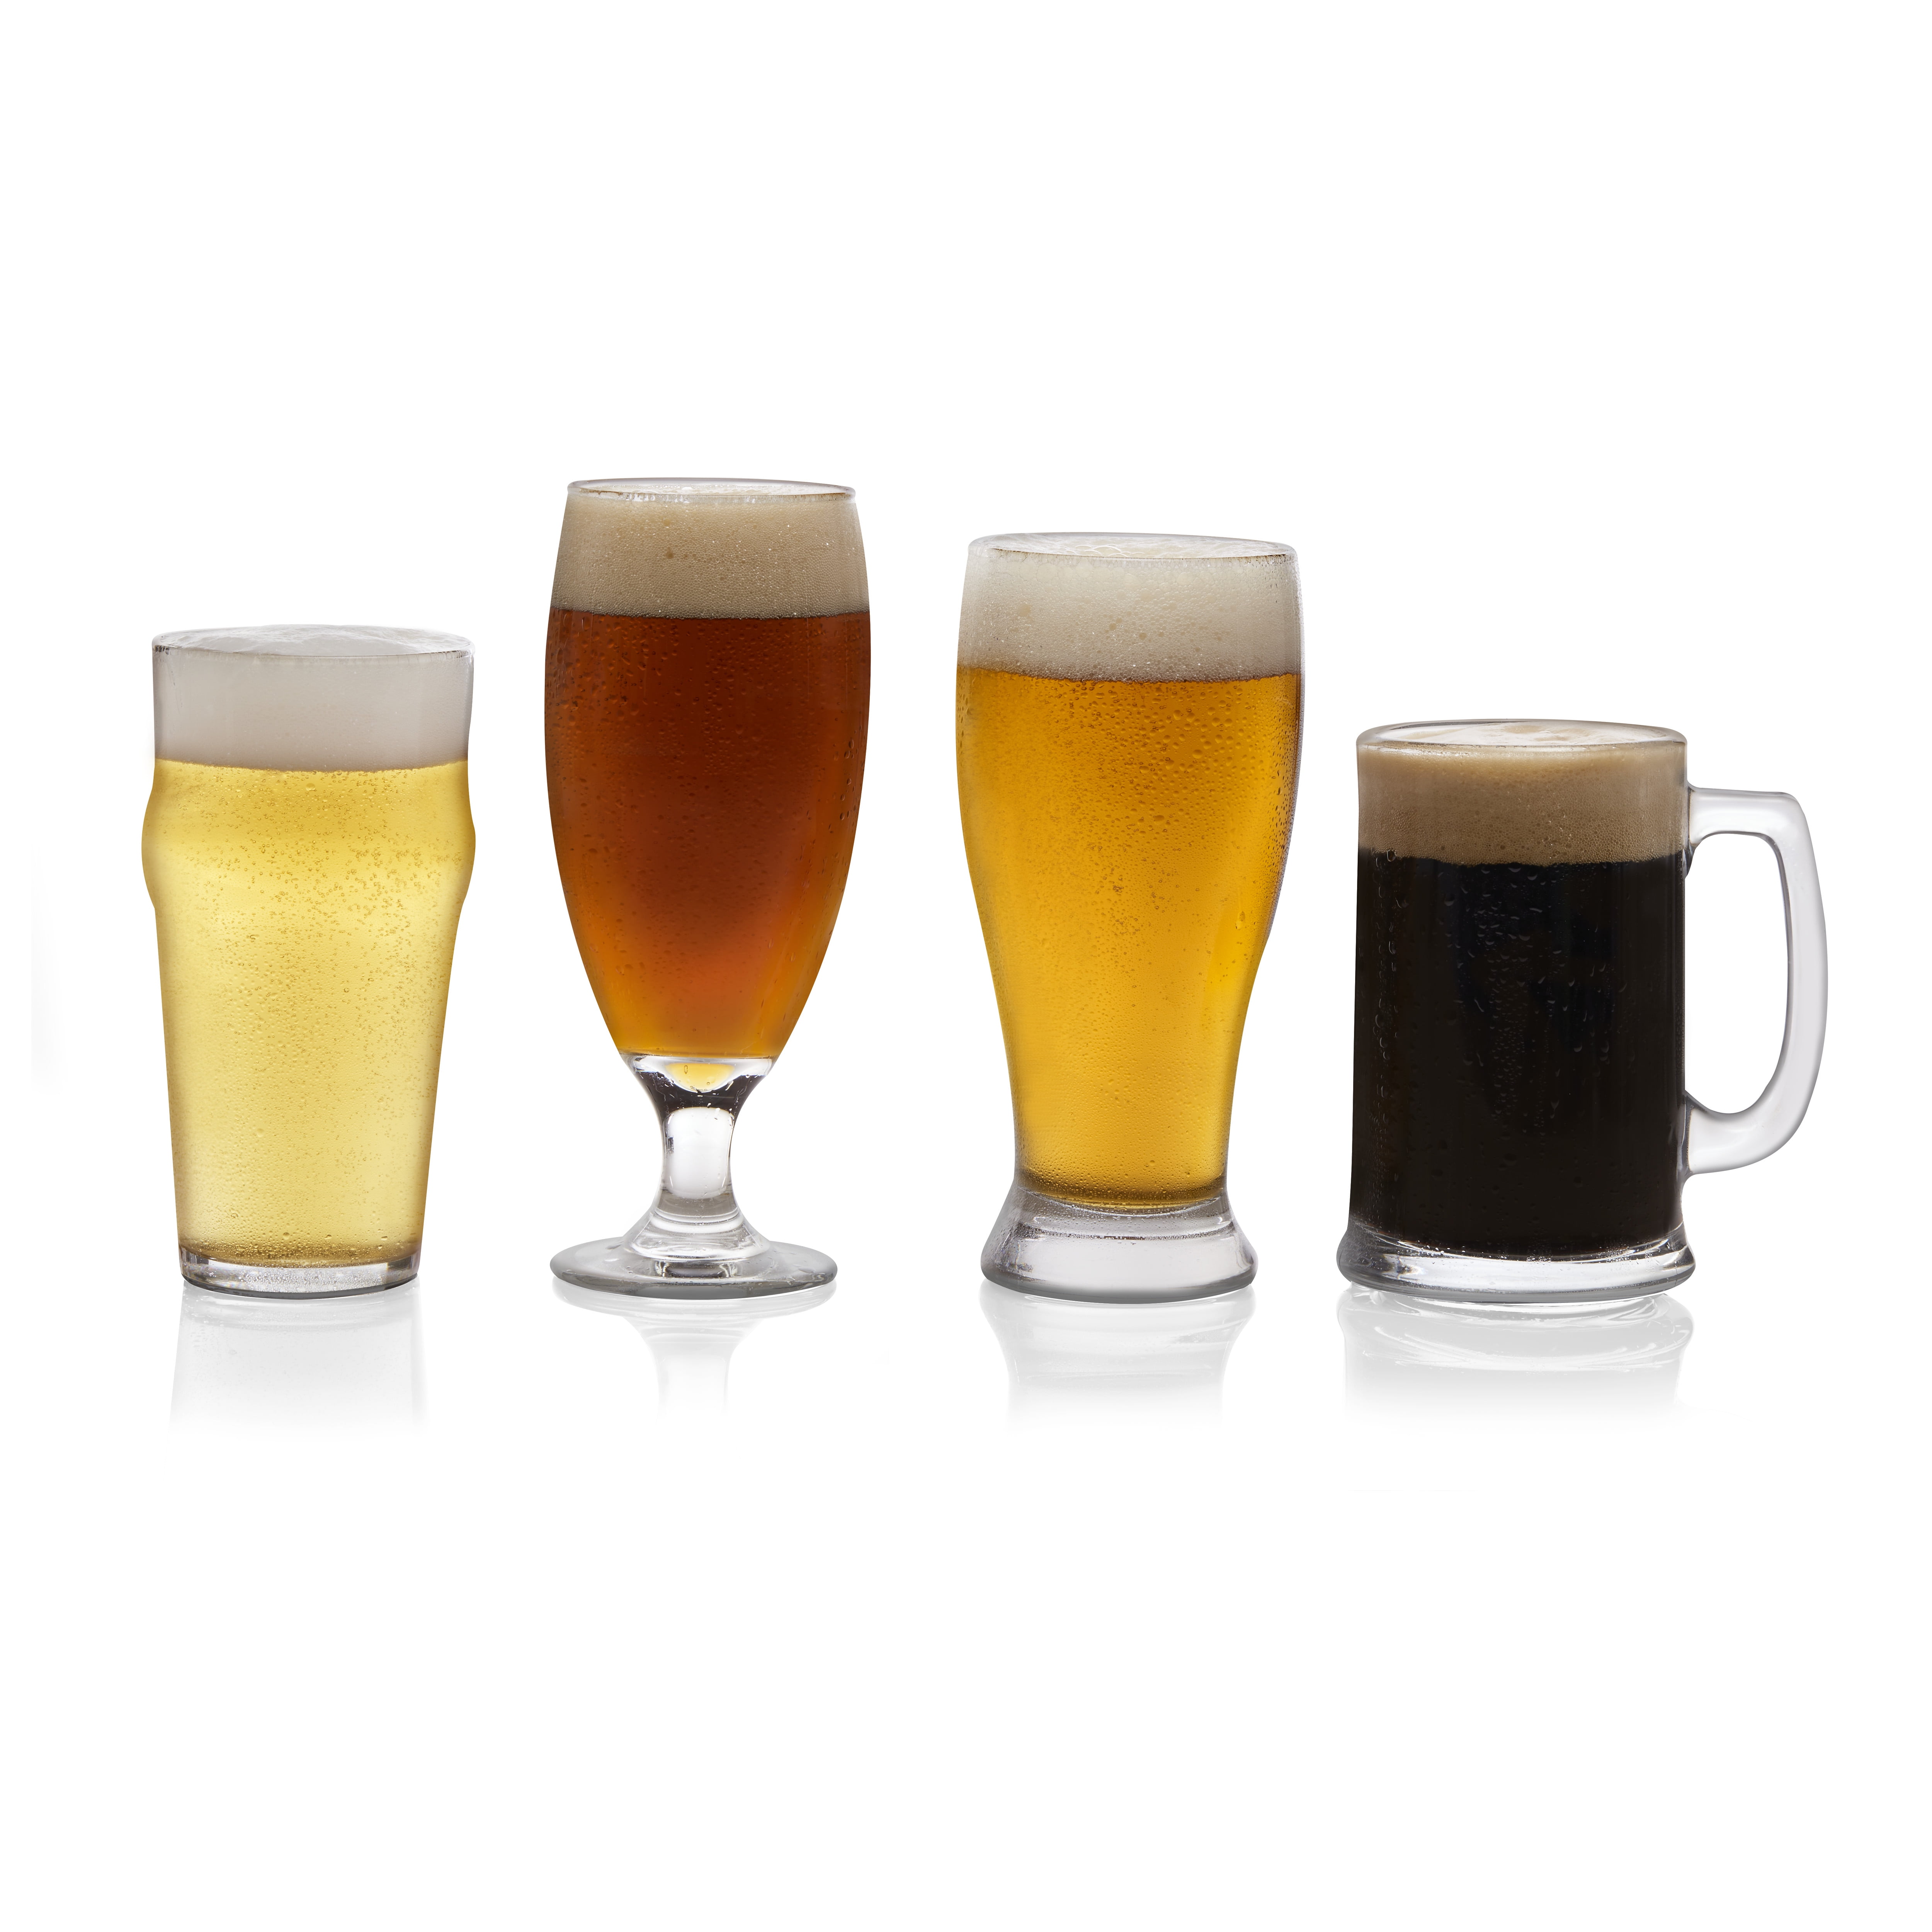 Spanish Small Beer Glass - Set of 4